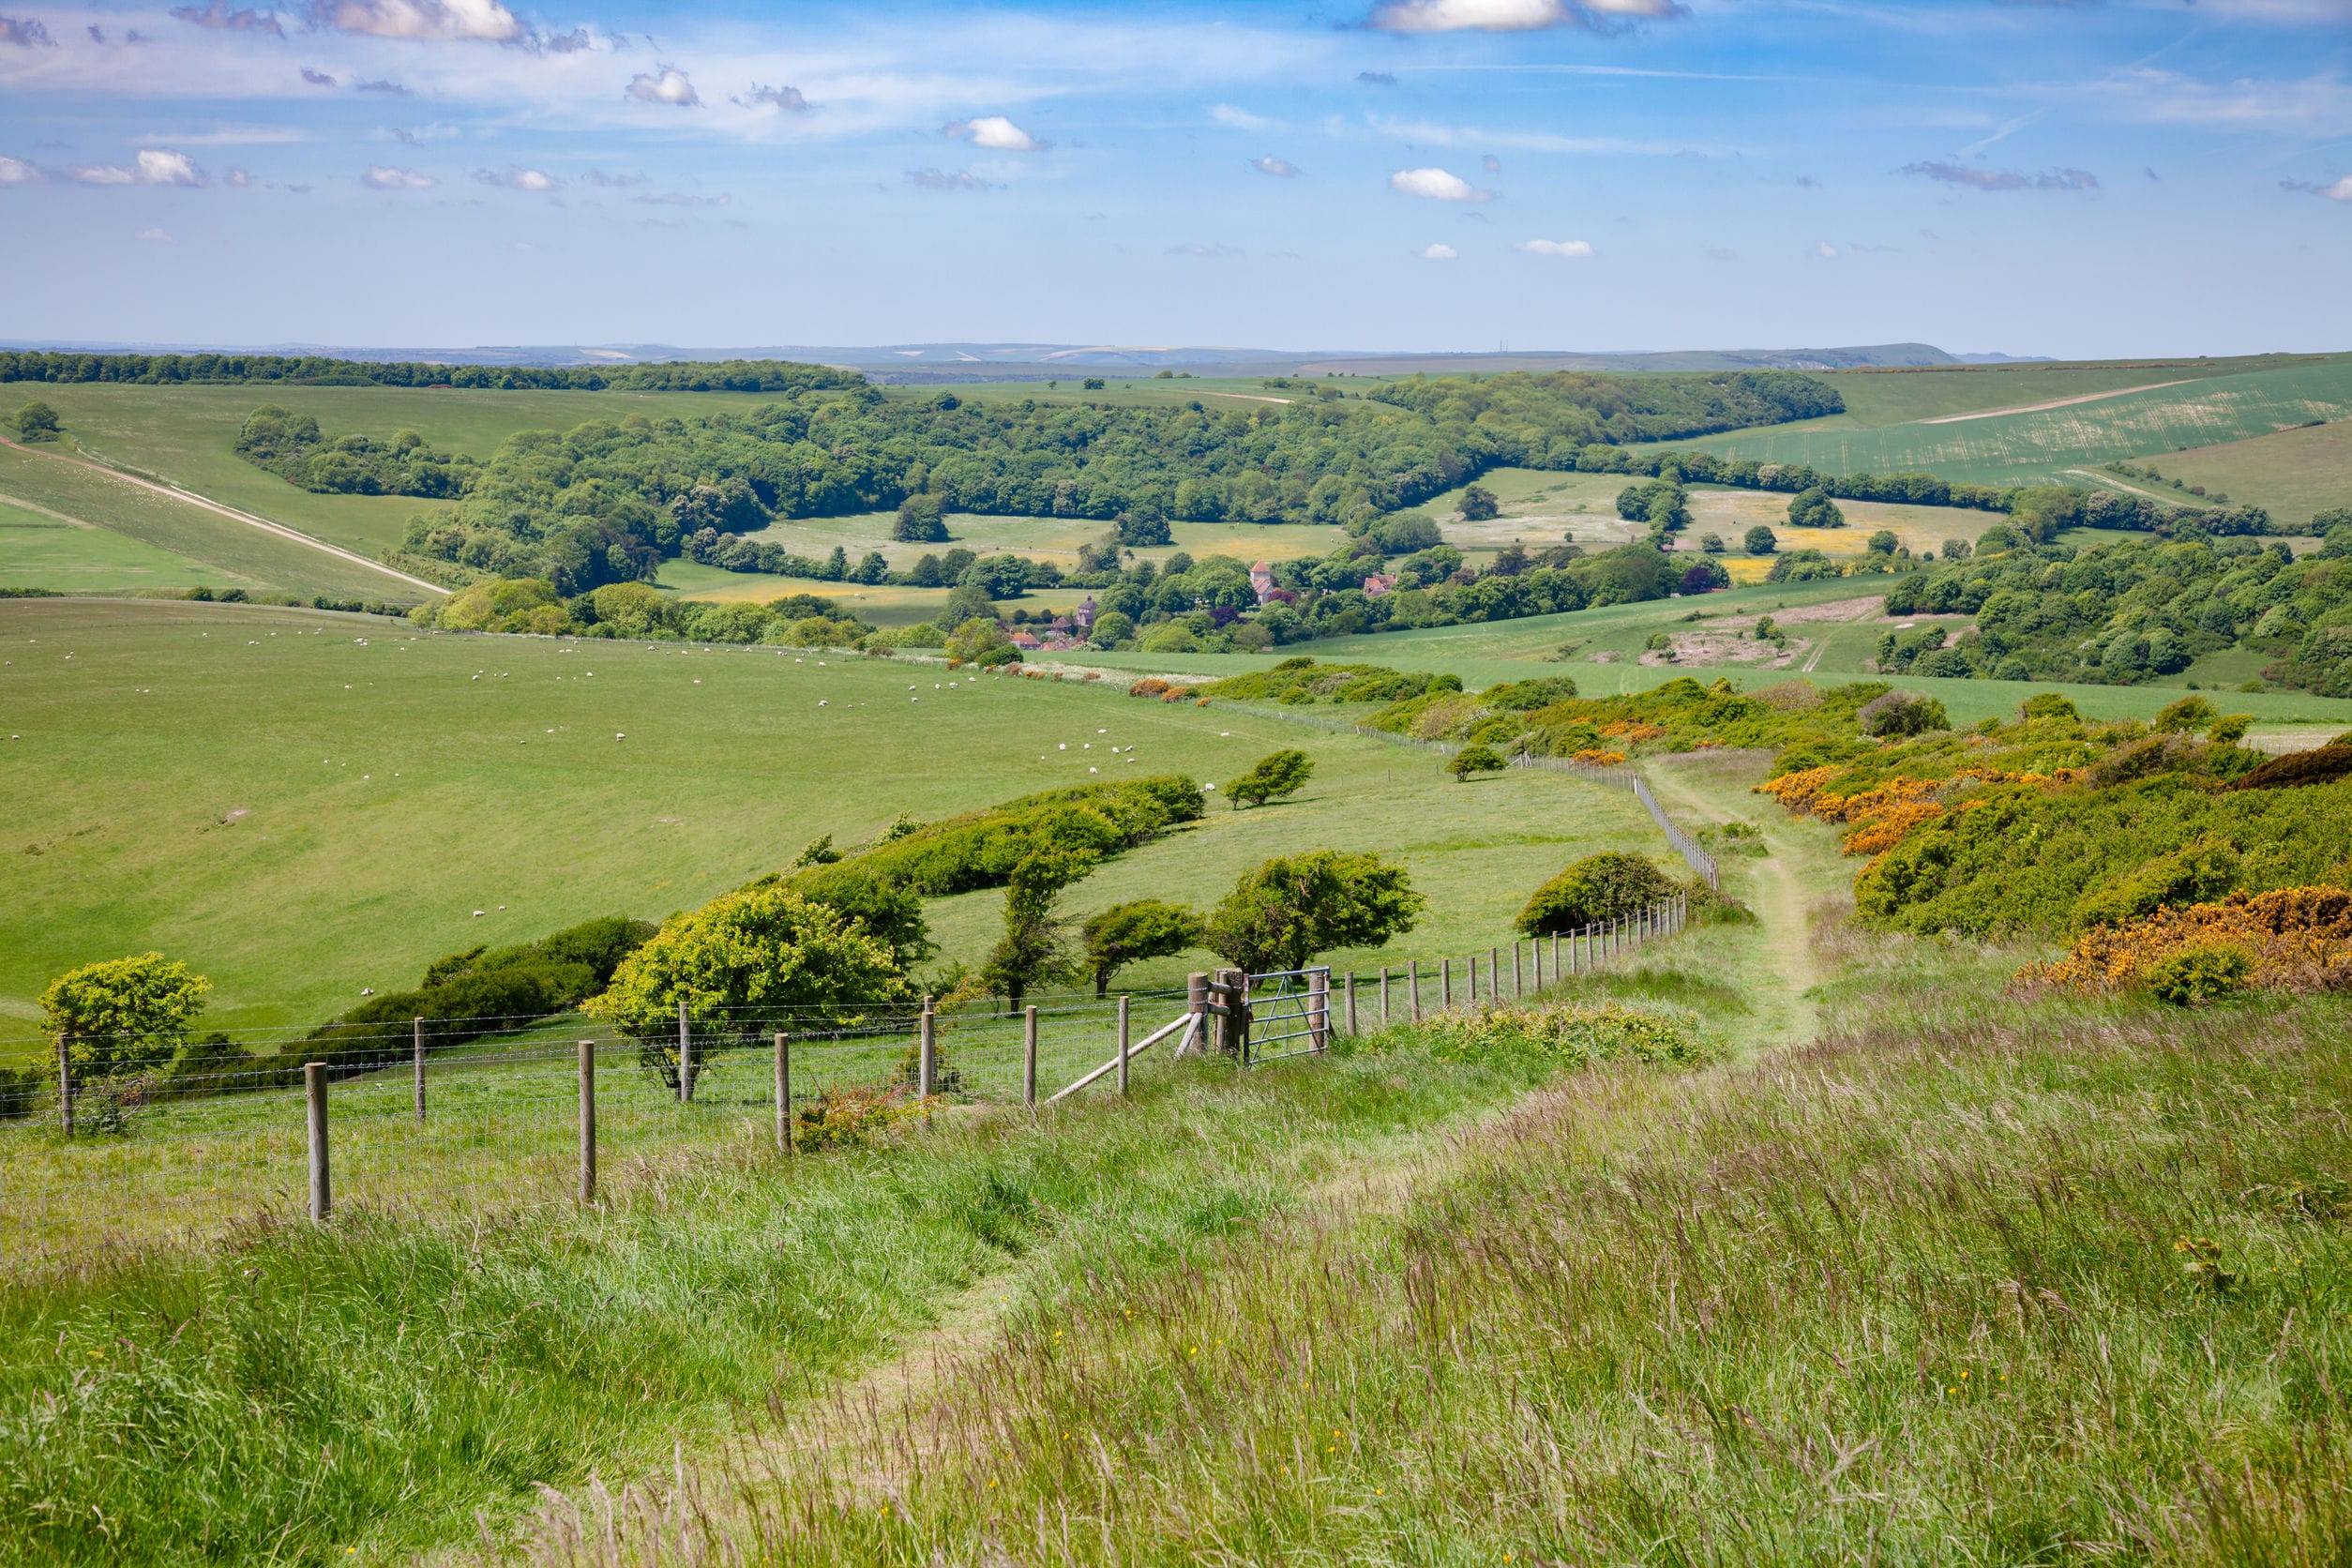 south downs way national trail in sussex southern england uk